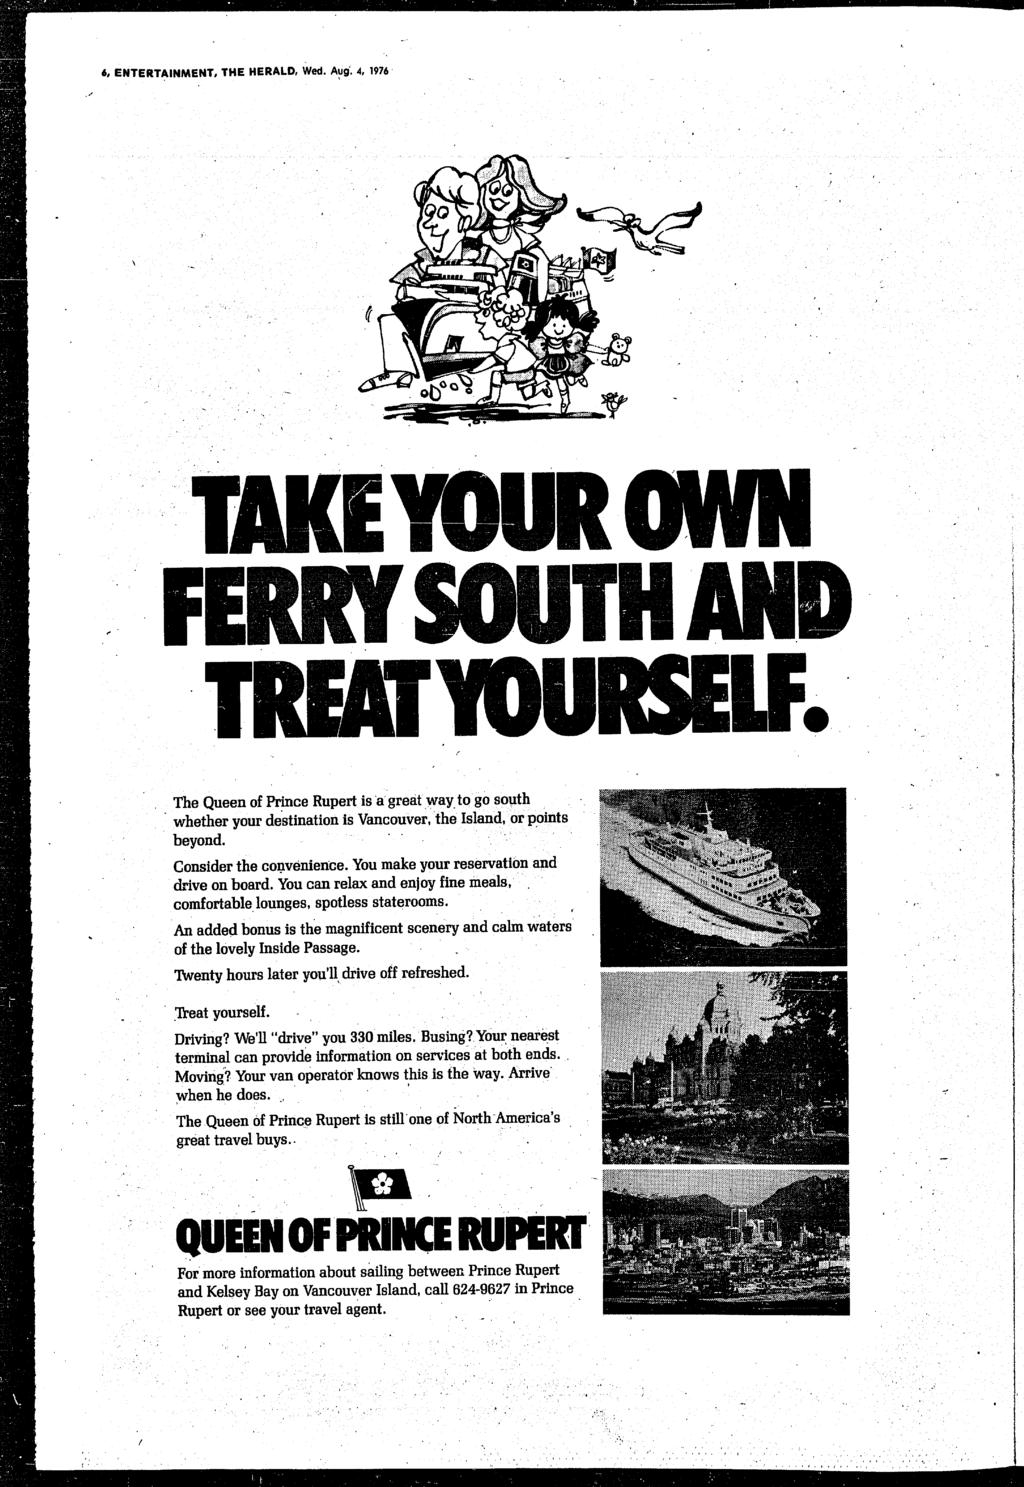 ' t, 6, ENTERTANMENT, THE HERALD, Wed. Aug. 4, 1976 ER/W SOu/',d The Queen of Prnce Rupert s a great way. to go south whether your destnaton s Vancouver, the sland, or ponts beyond. Consder the co.